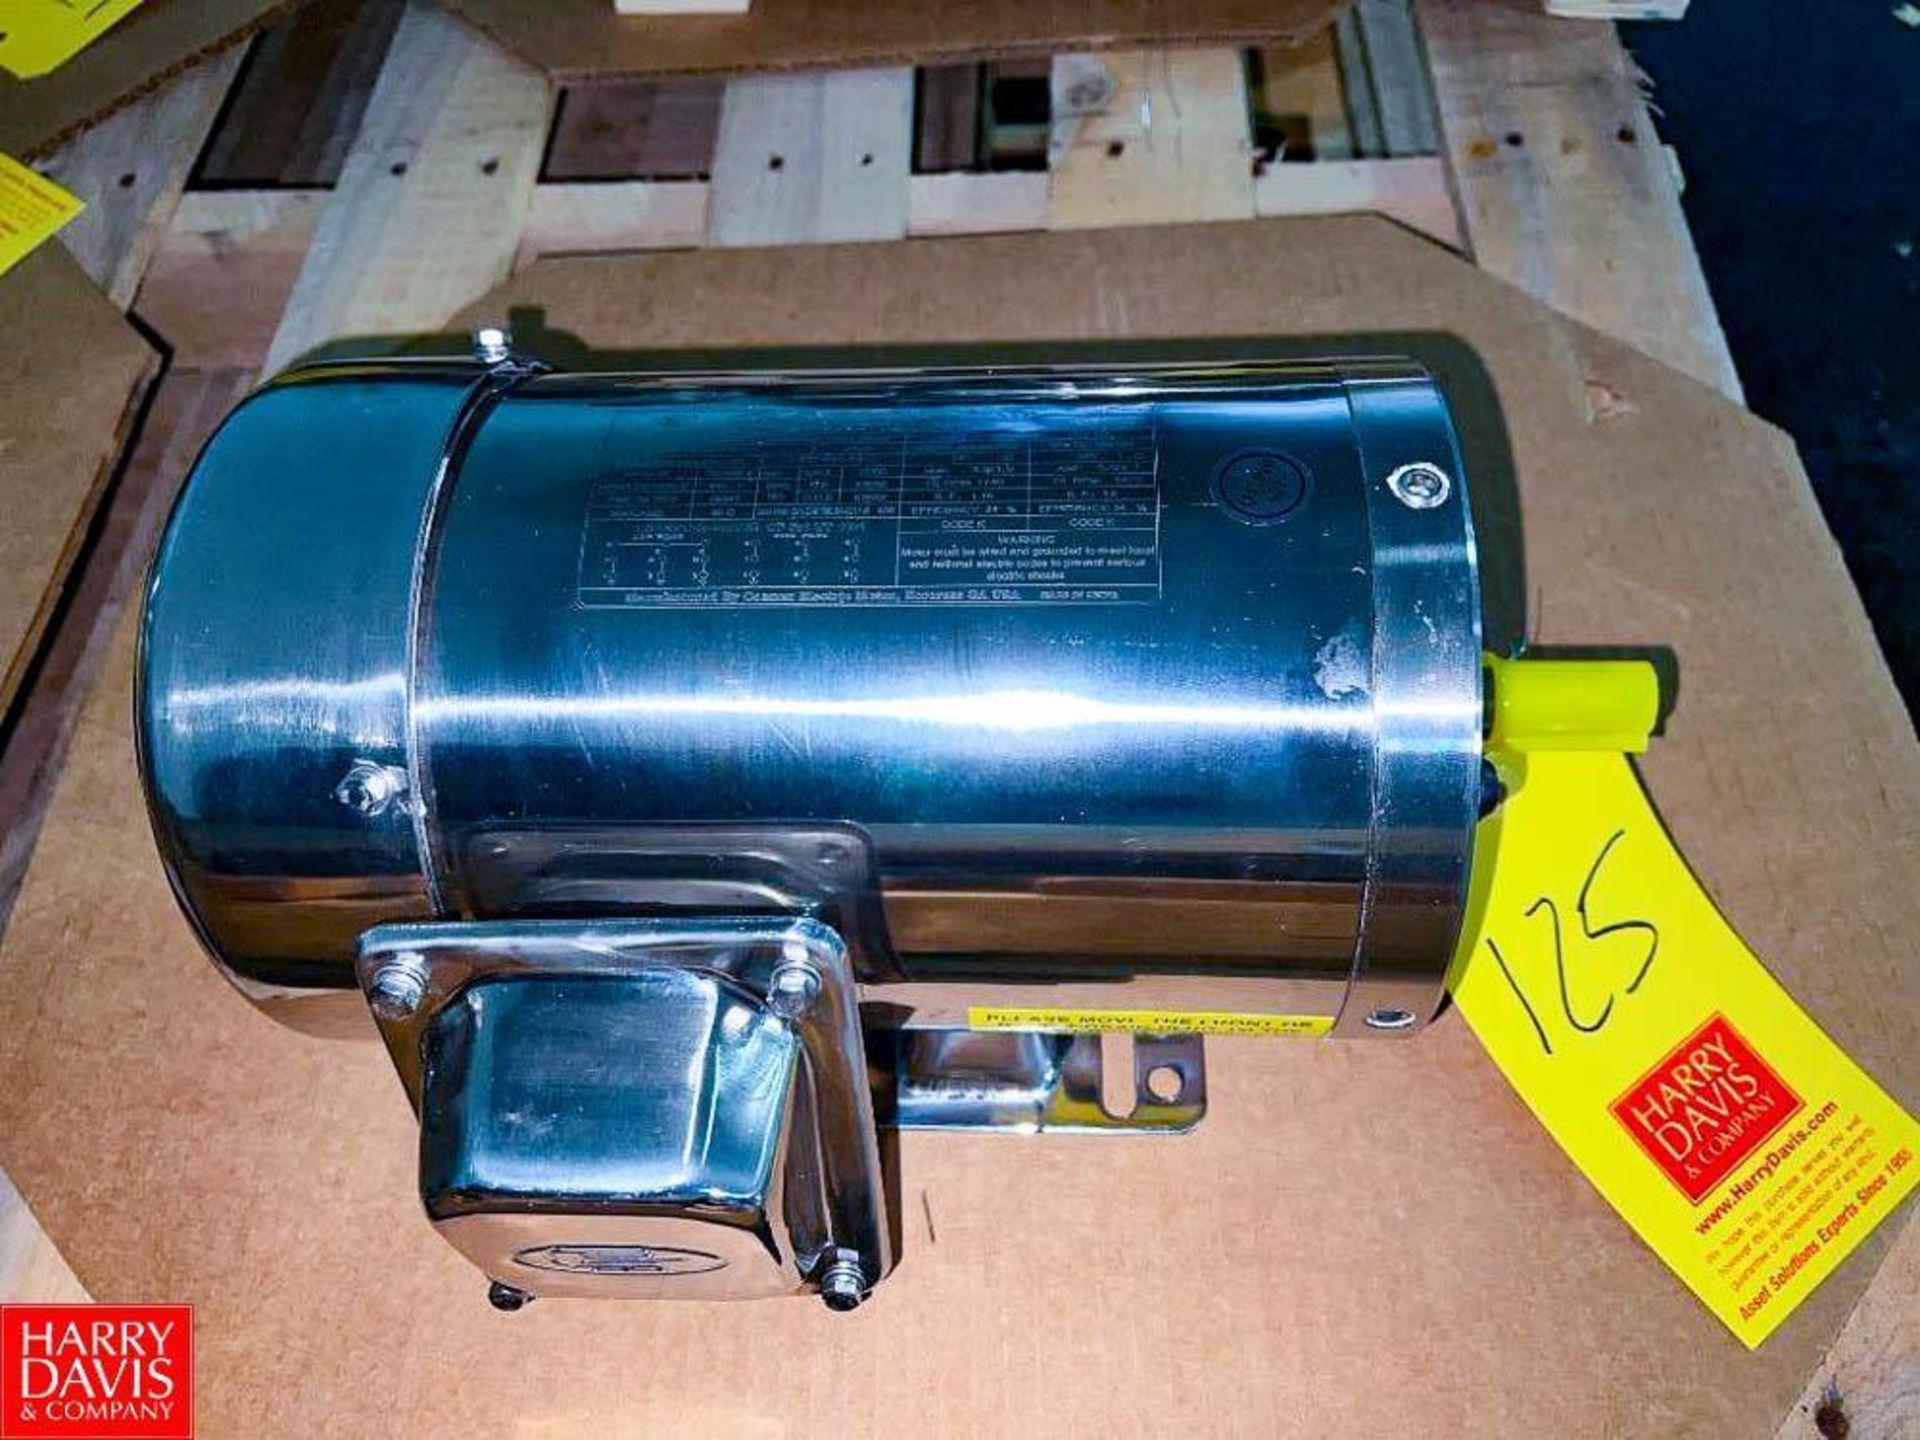 NEW Gator S/S Clad, 1.5 HP 1,740 RPM Motor - Image 2 of 2